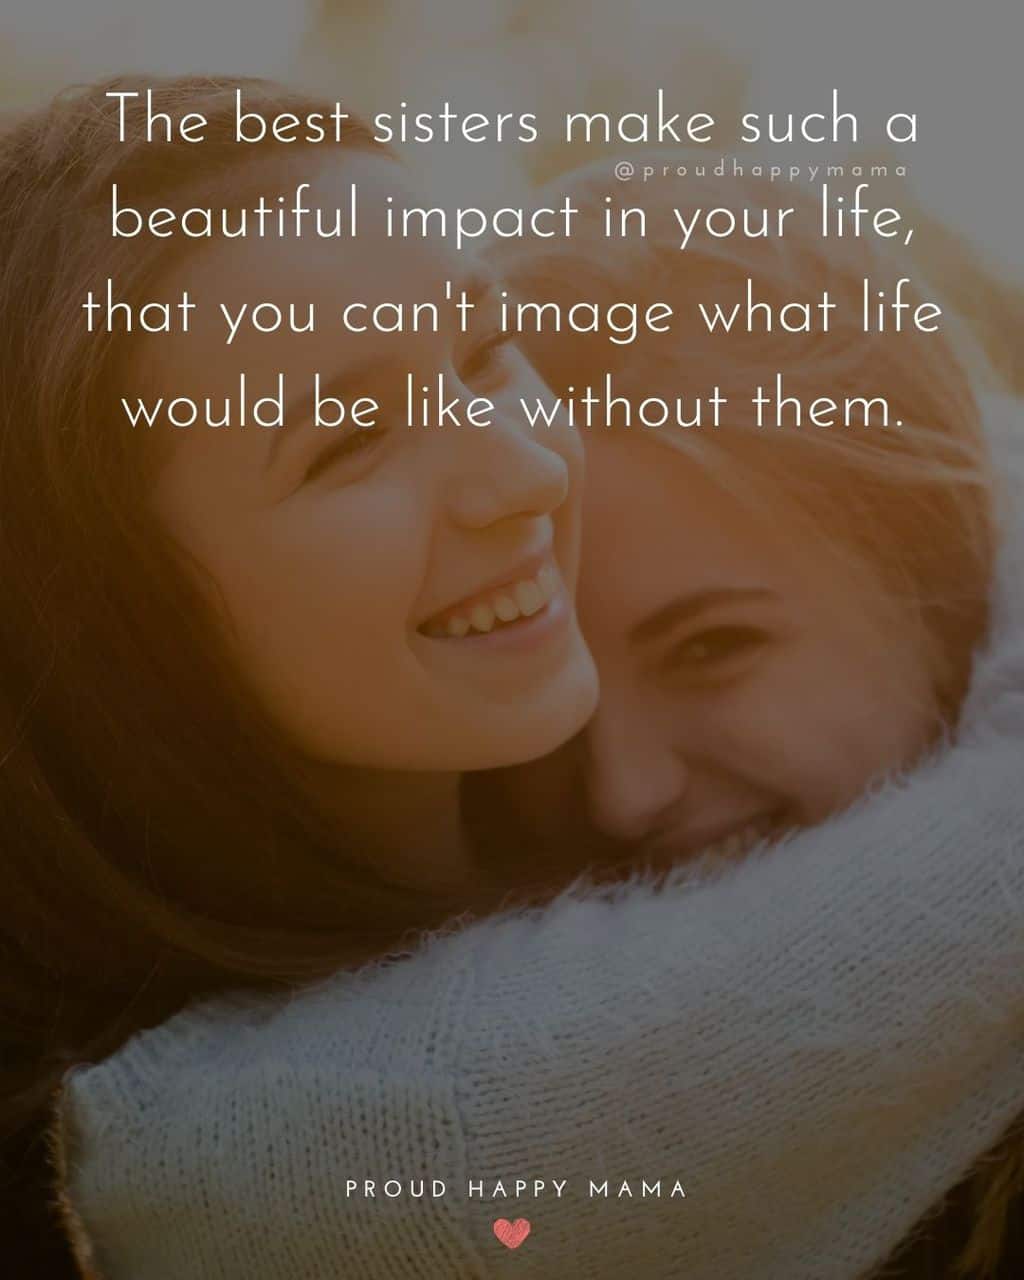 I love my sister quotes - The best sisters make such a beautiful impact in your life, that you cant image what life would be like without them.